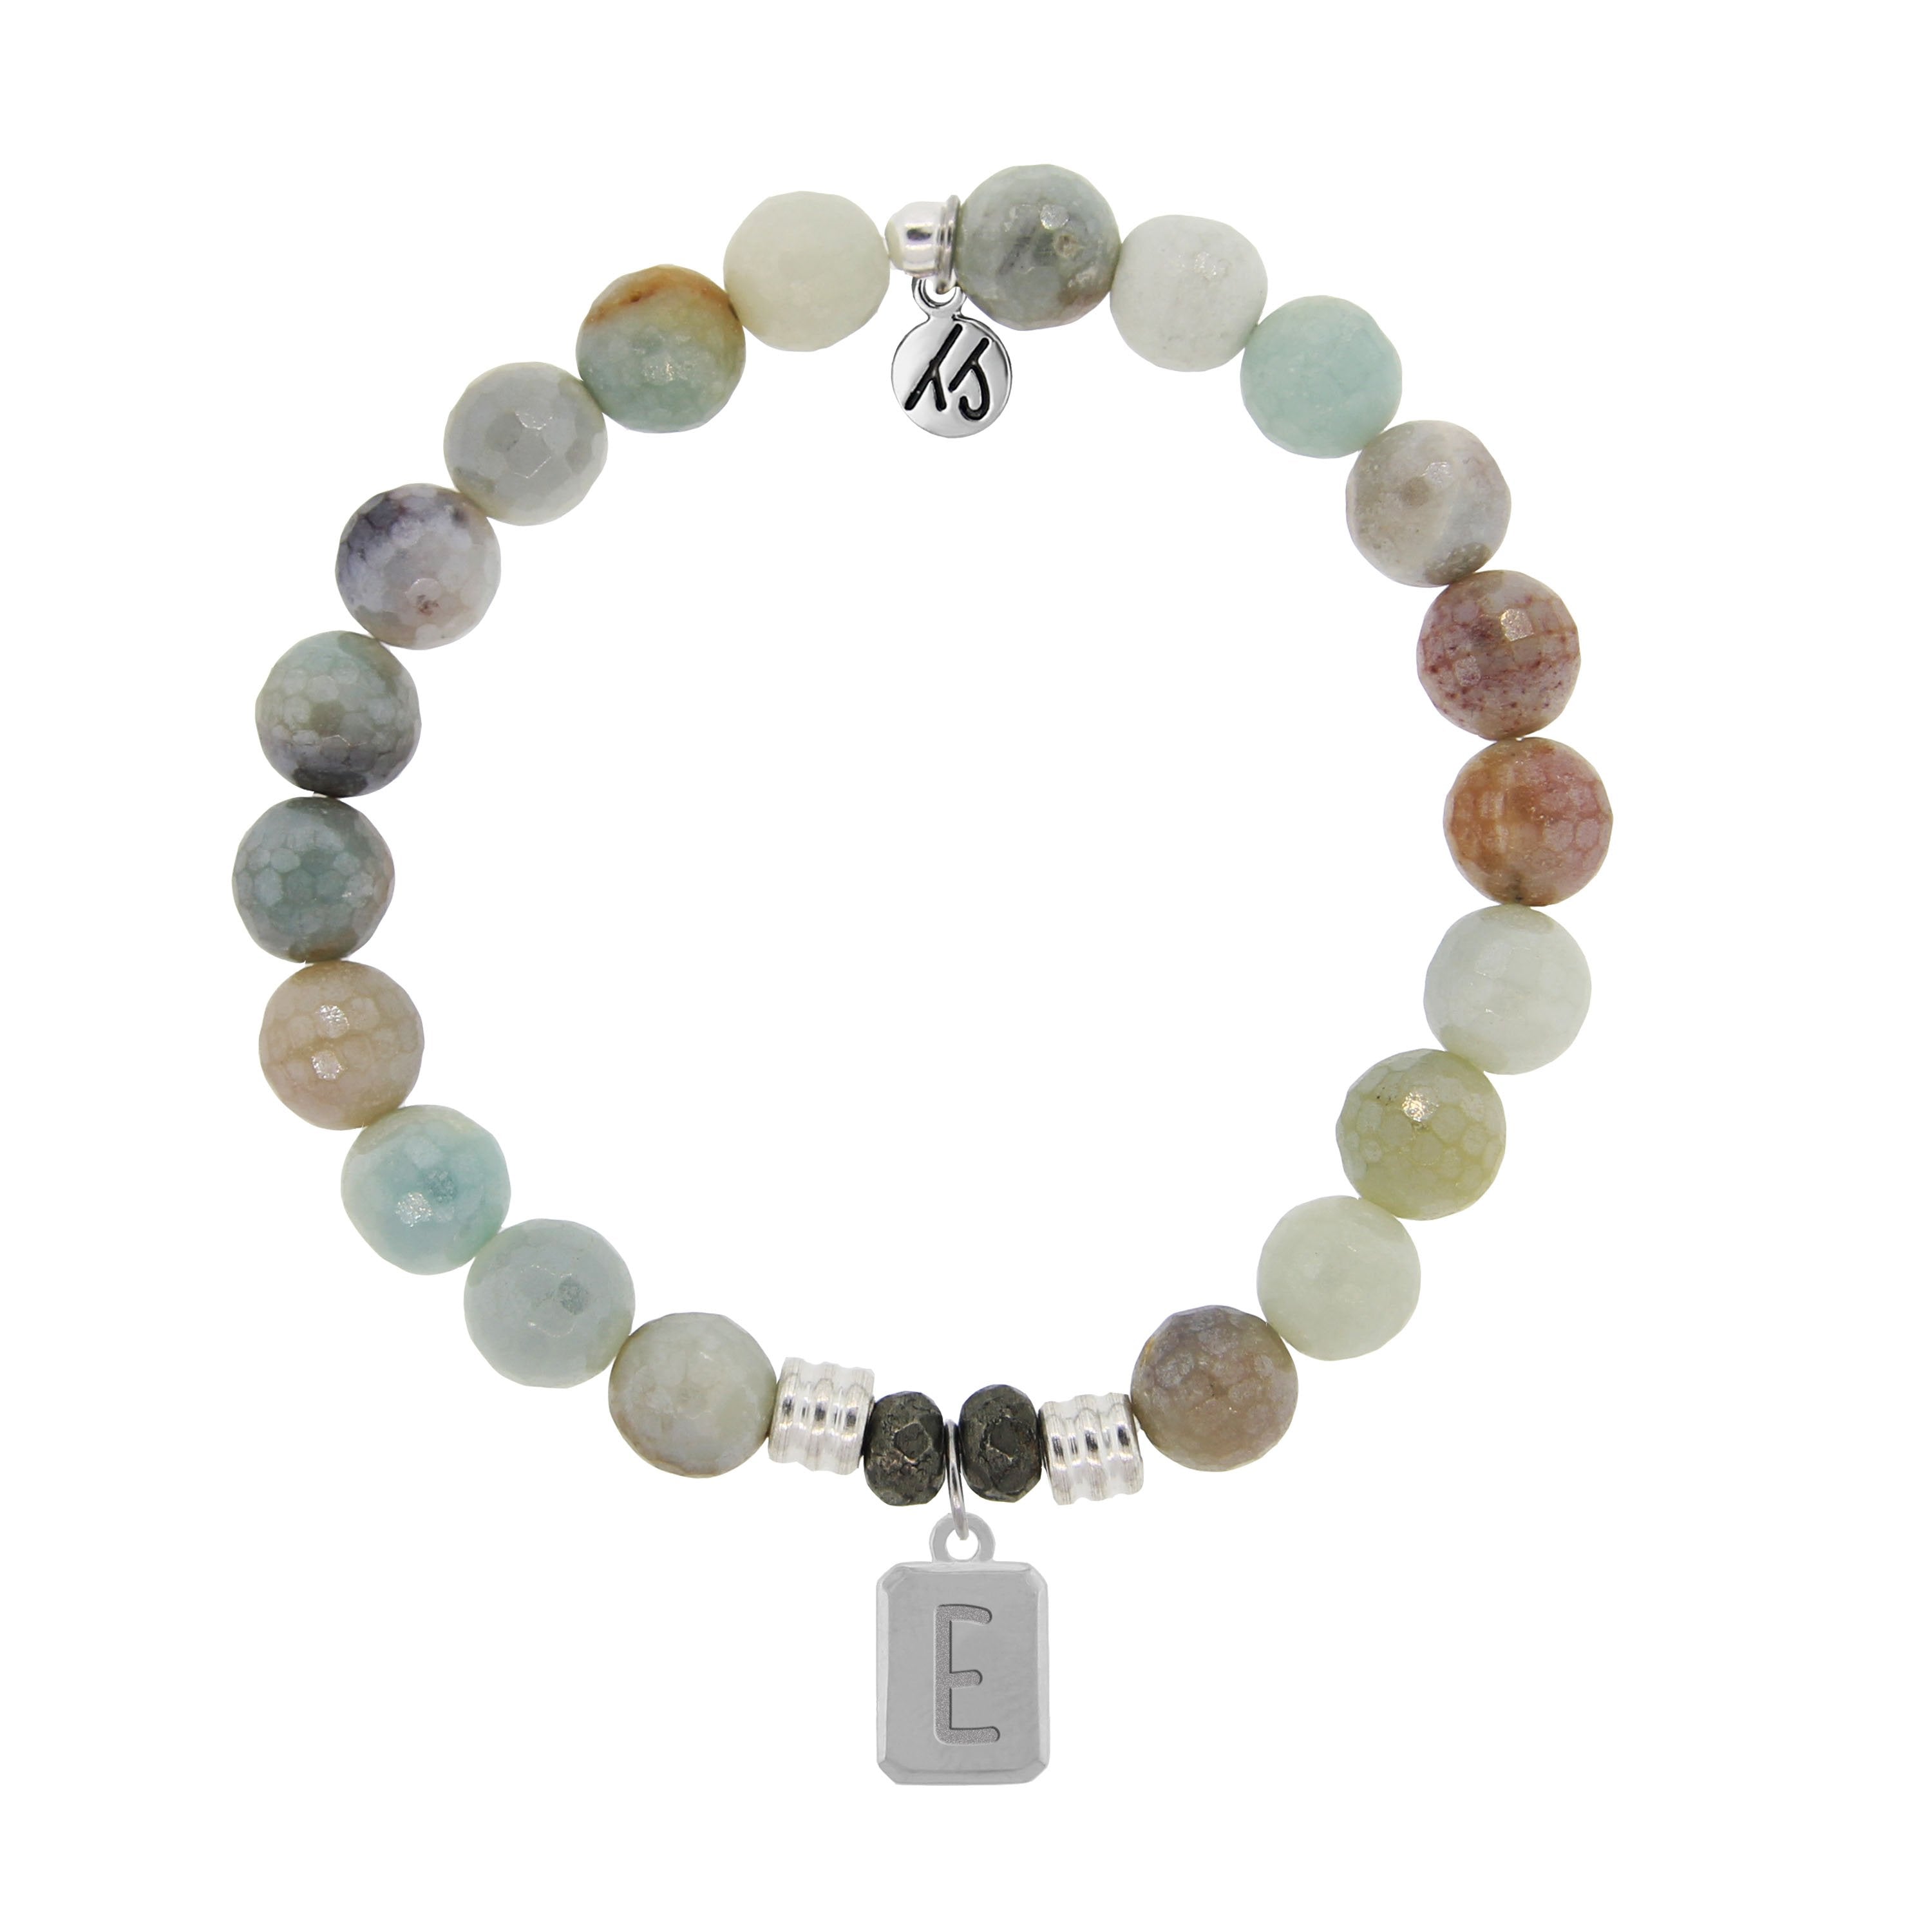 Initially Your's ite Stone Bracelet with Letter E Sterling Silver Charm